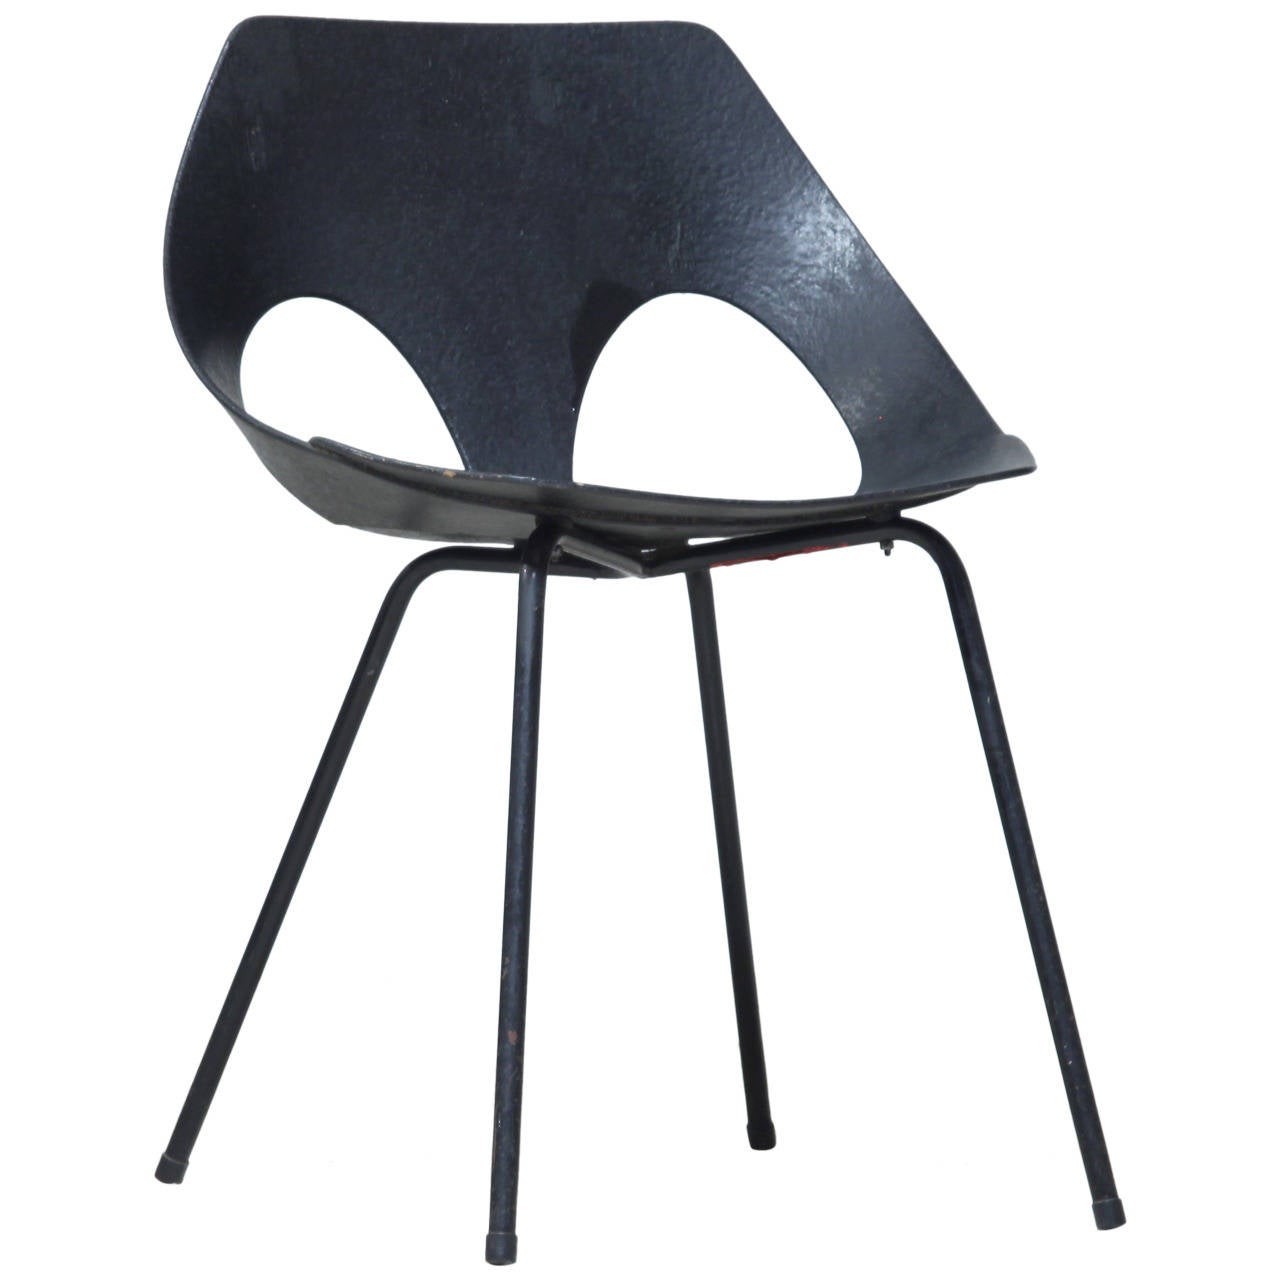 Rare Version of the C3 Chair by Frank Guille